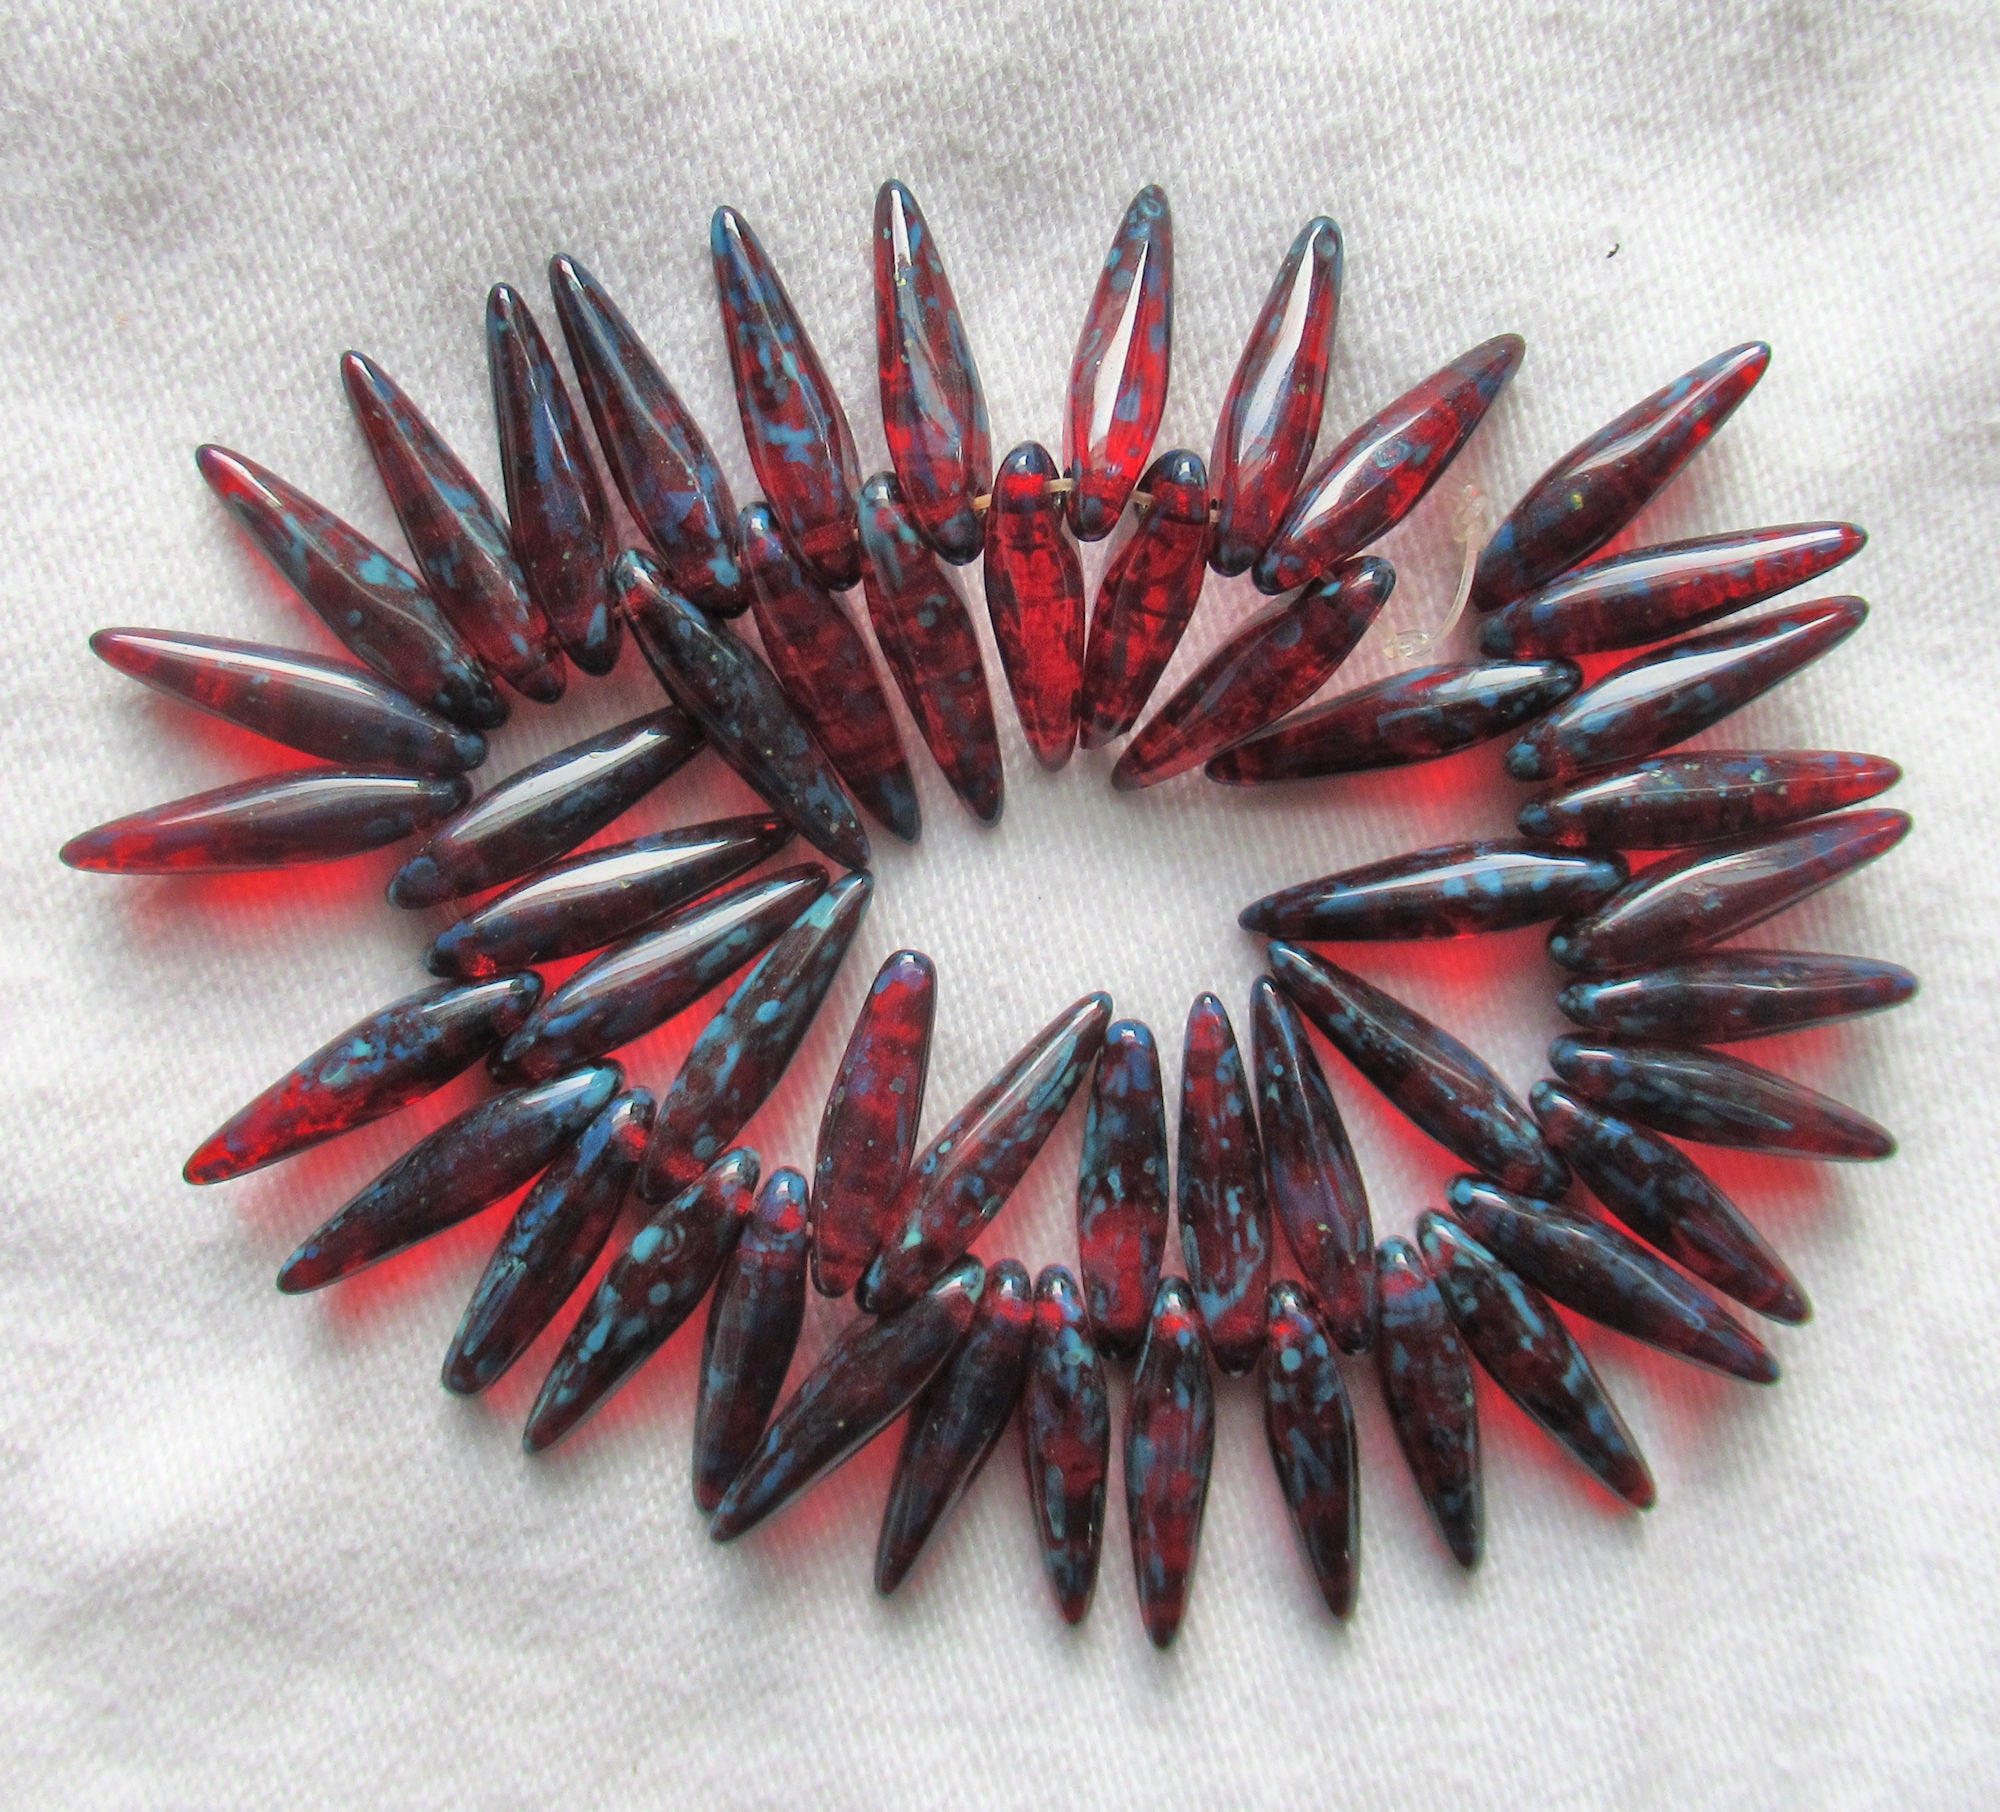 Bead, Czech fire-polished glass, ruby red, 12mm faceted round. Sold per  15-1/2 to 16 strand, approximately 35 beads. - Fire Mountain Gems and  Beads